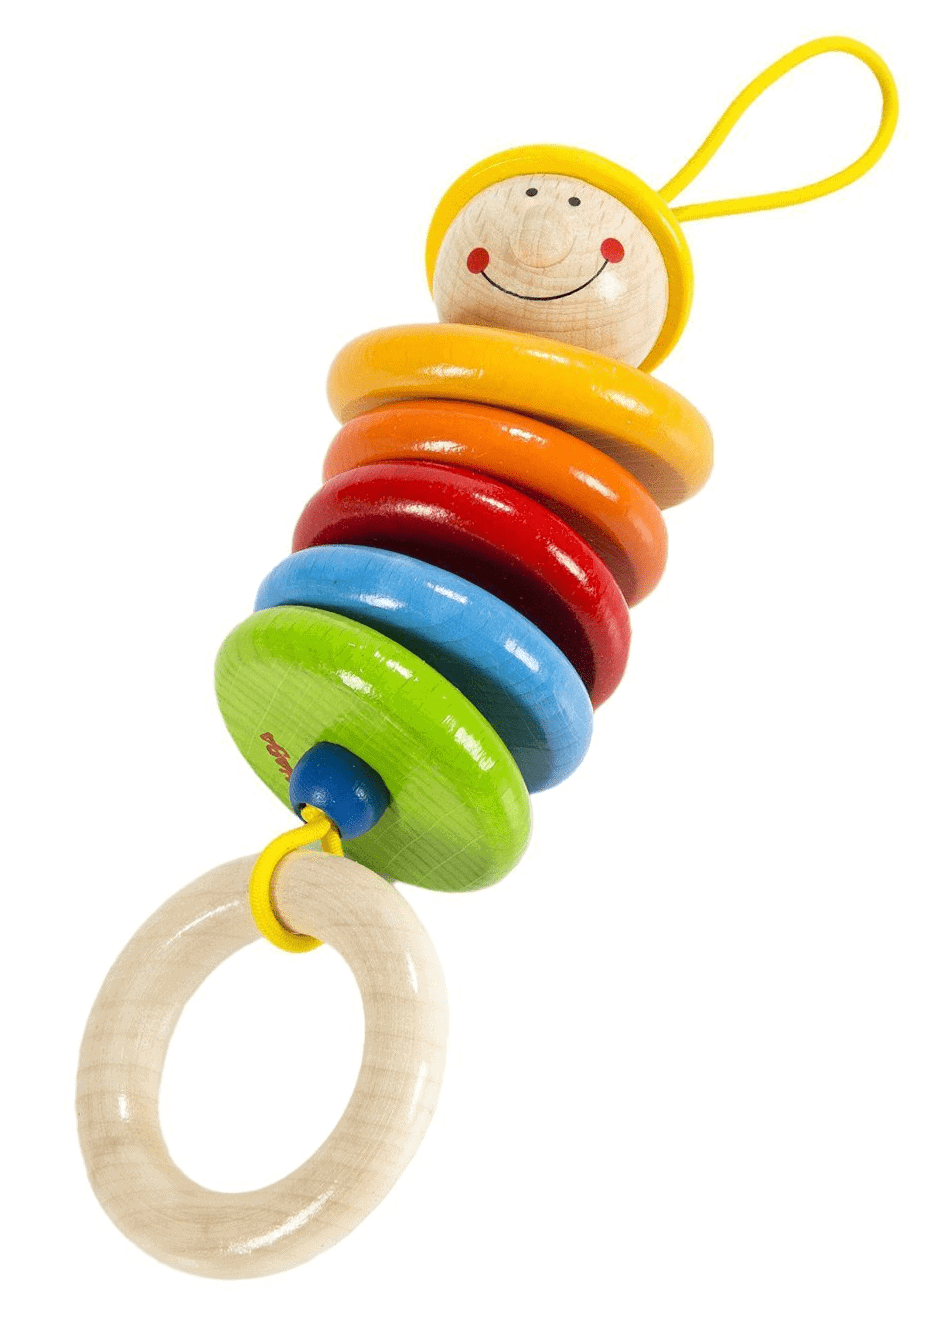 Non toxic wooden toys for babies. Colorful and fun. 